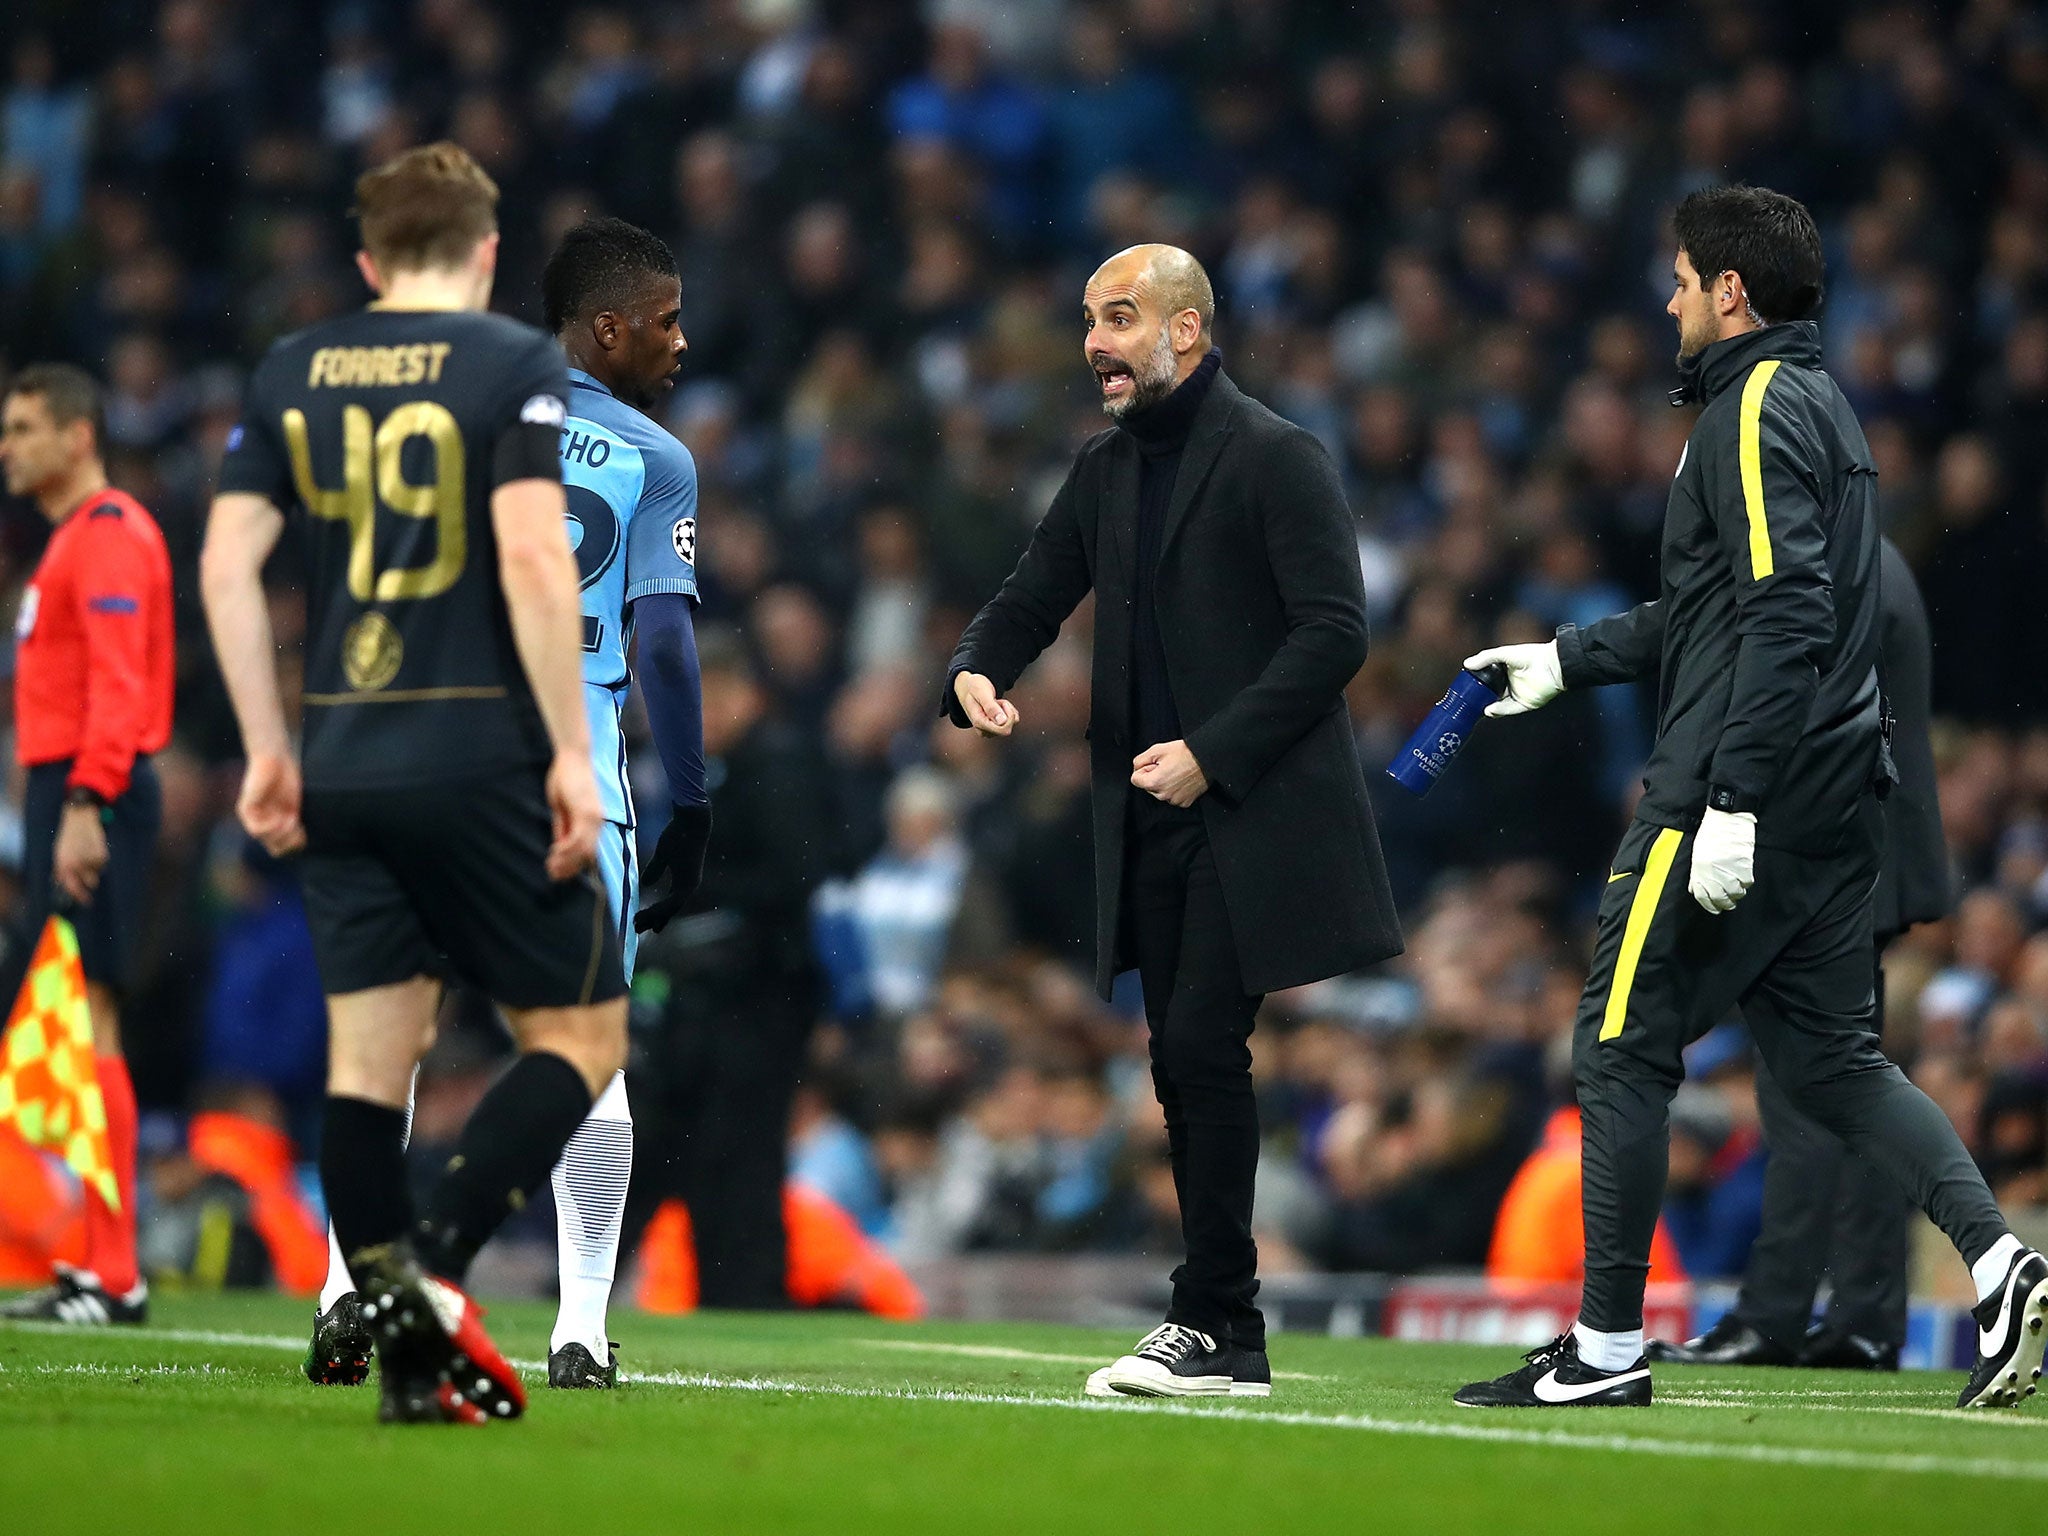 Pep Guardiola issues orders from the sideline